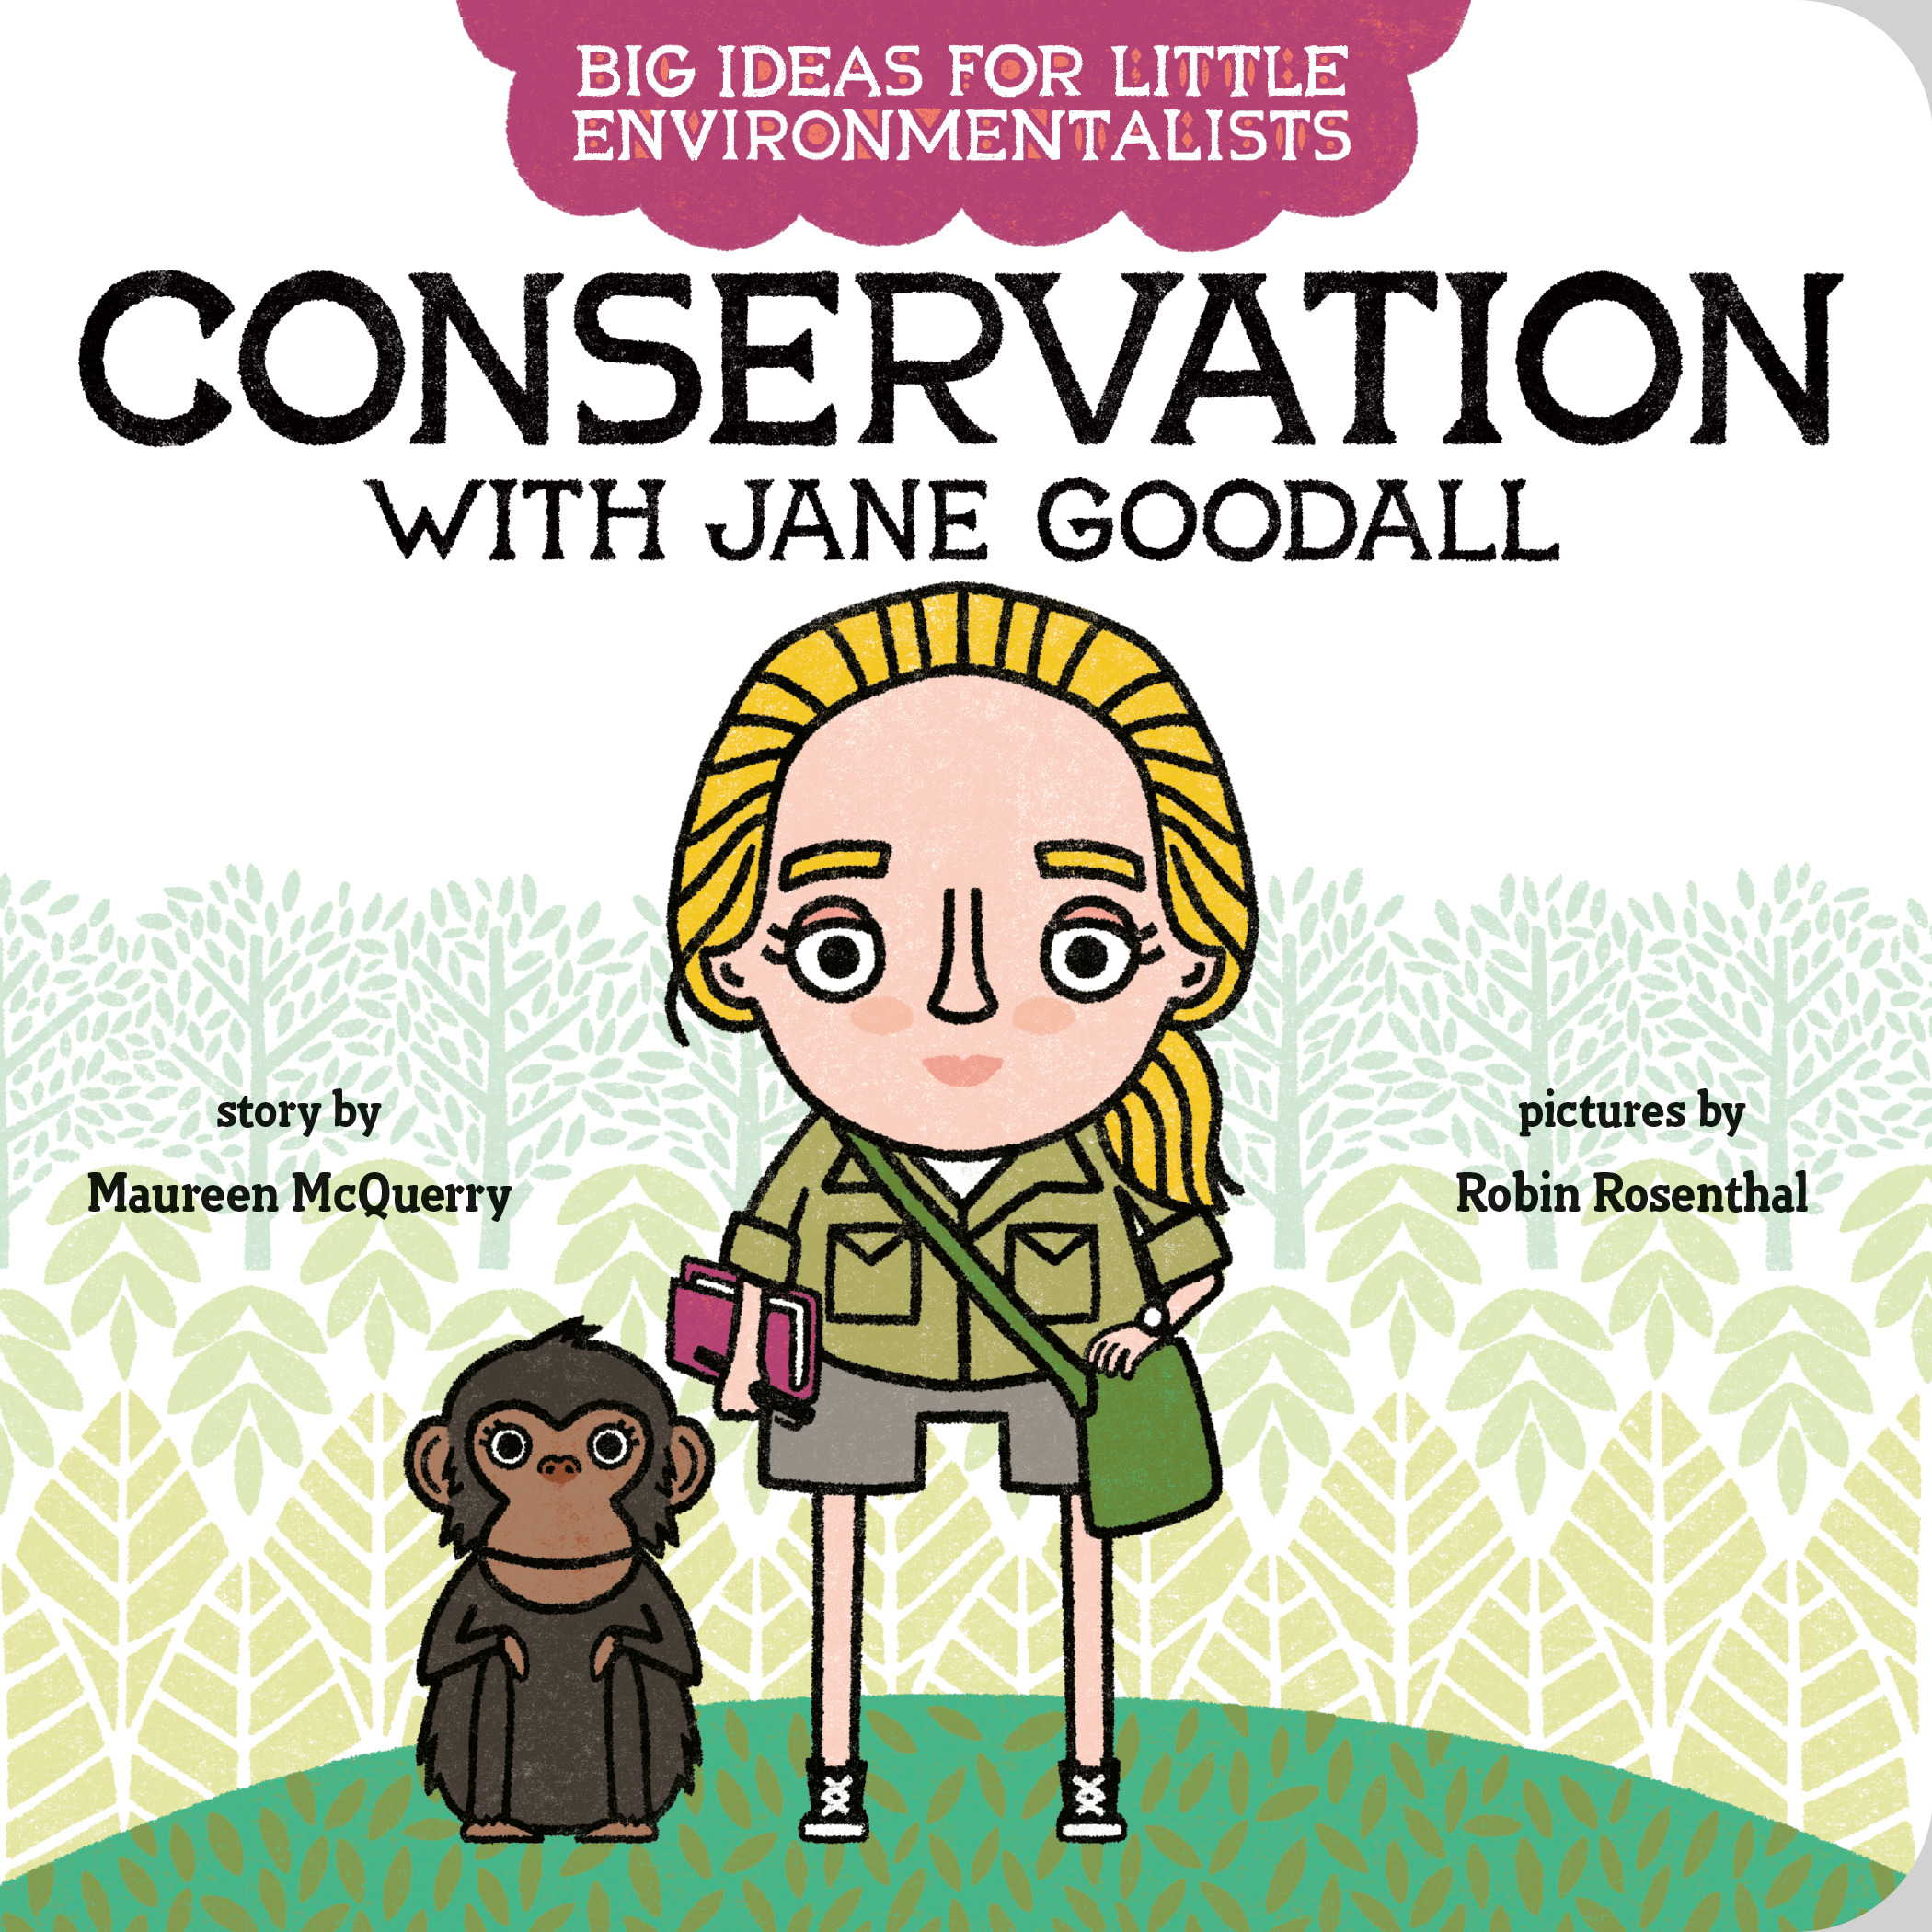 Big Ideas for Little Environmentalists: Conservation with Jane Goodall | McQuerry, Maureen